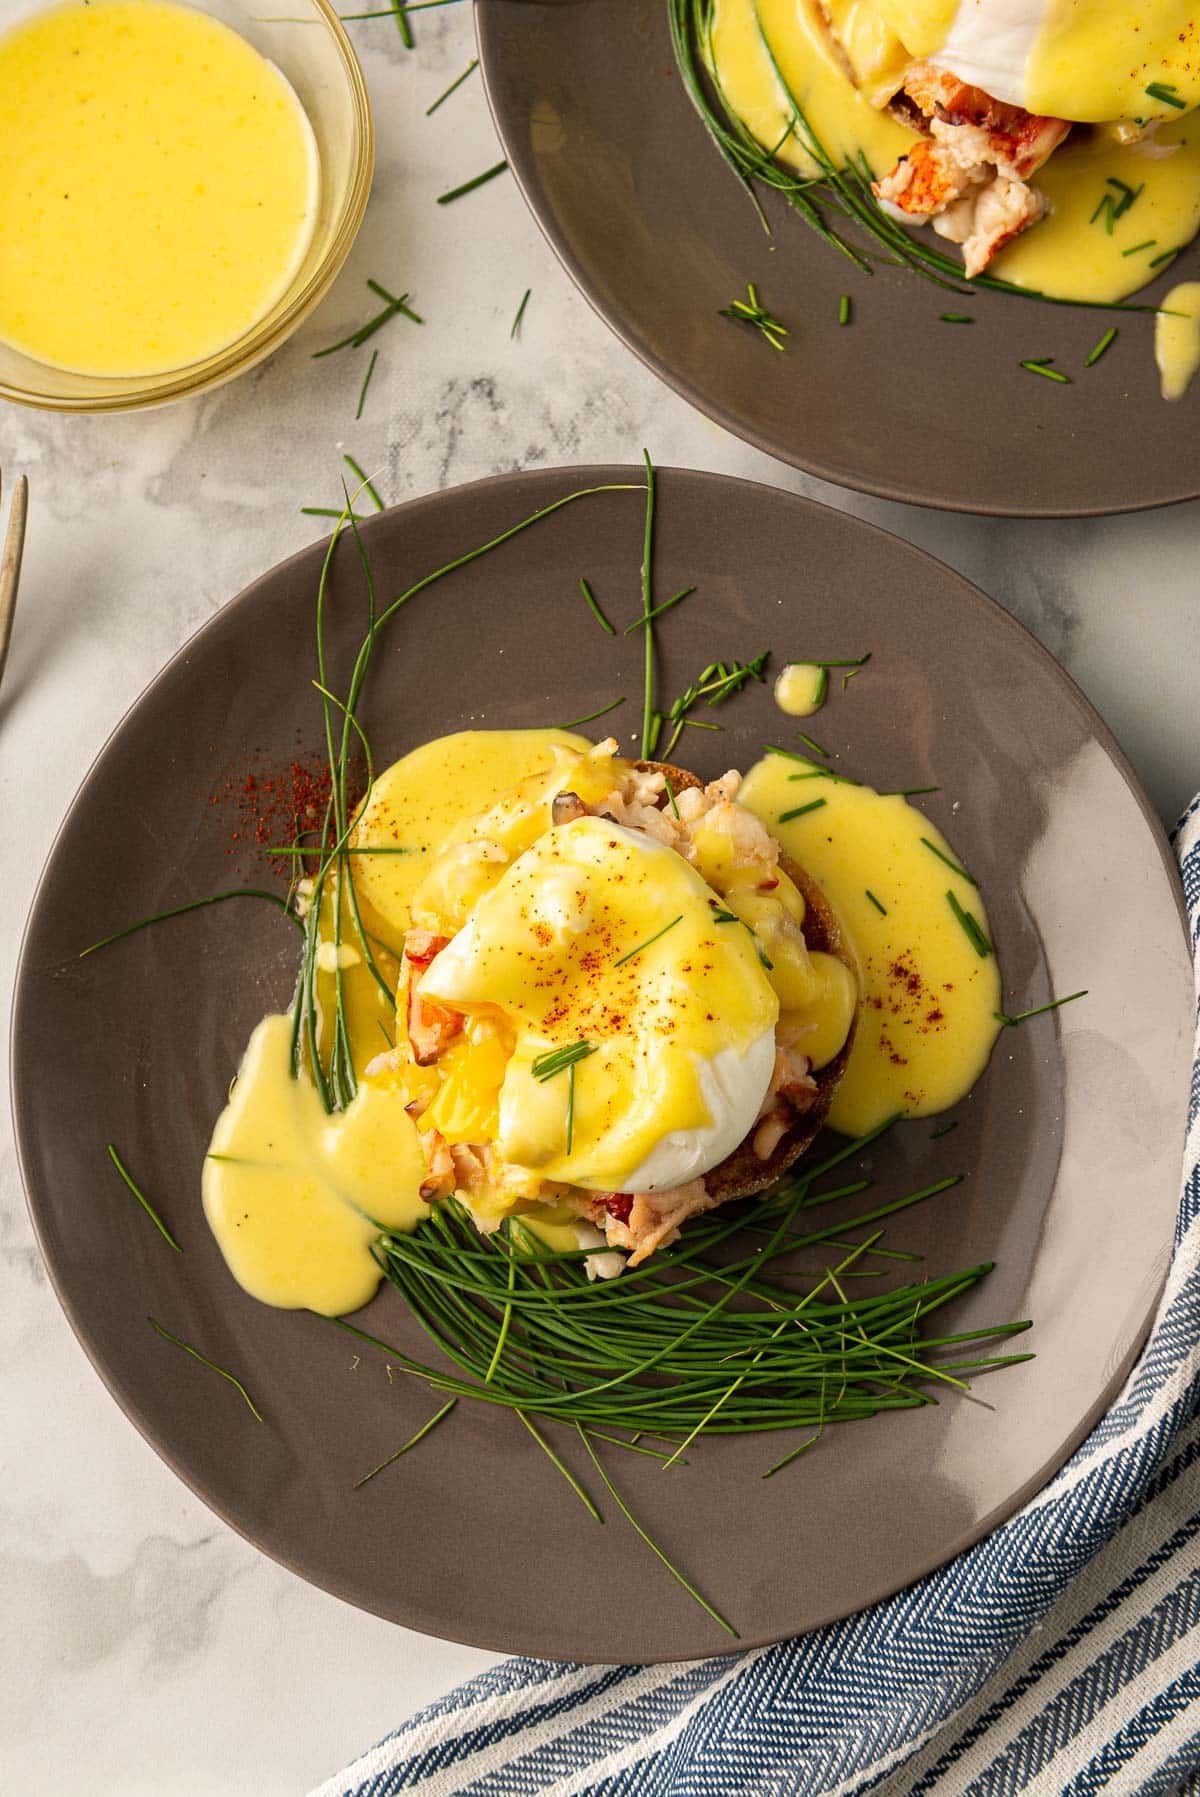 Yolk drizzling down the side of the lobster Benedict, decorated with chives on a dark plate.